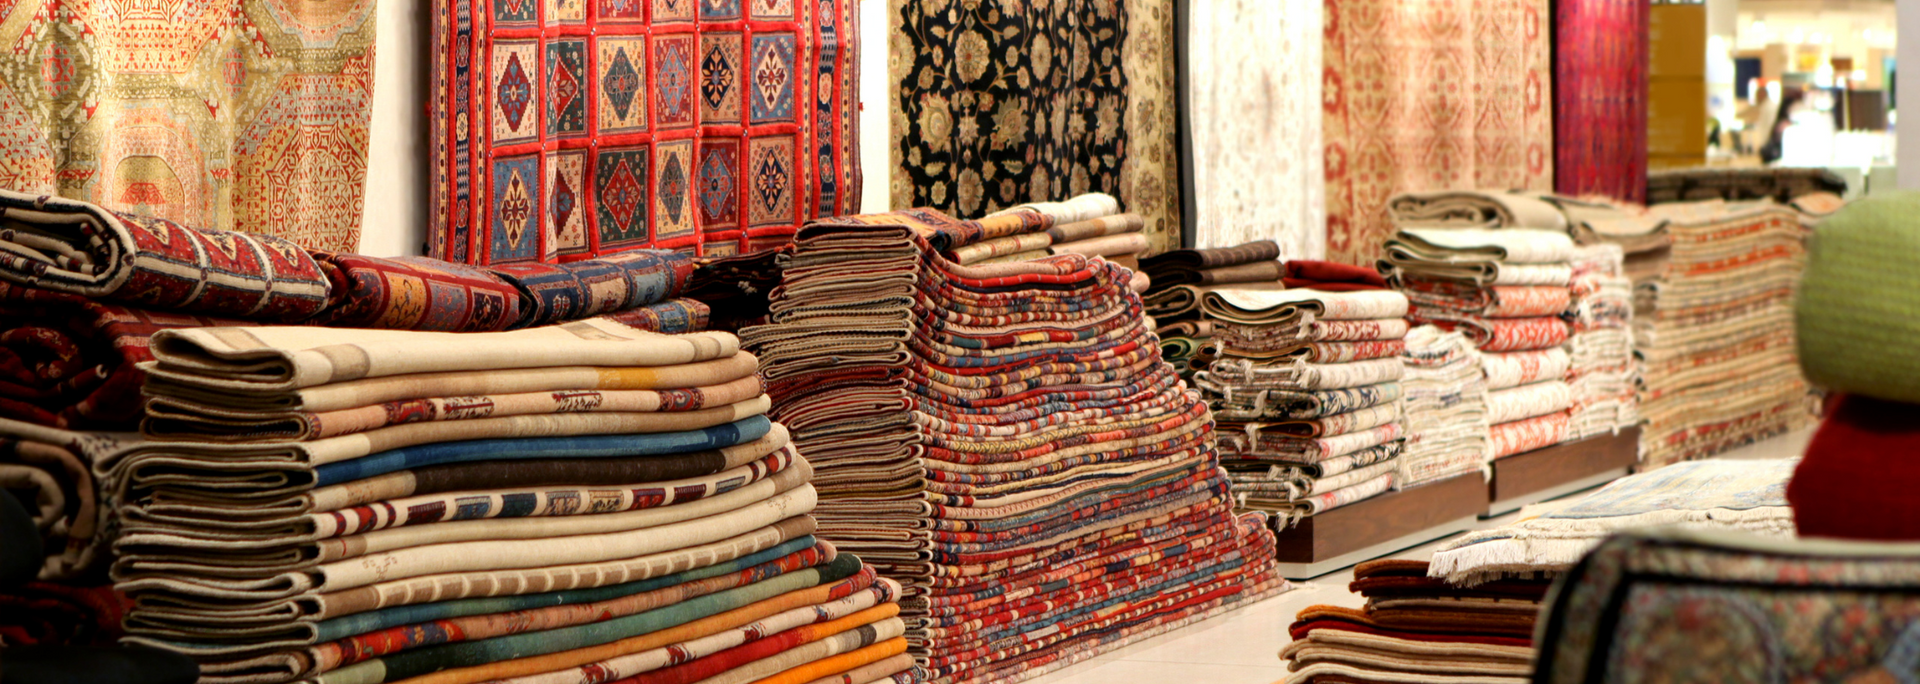 Picture of Rugs